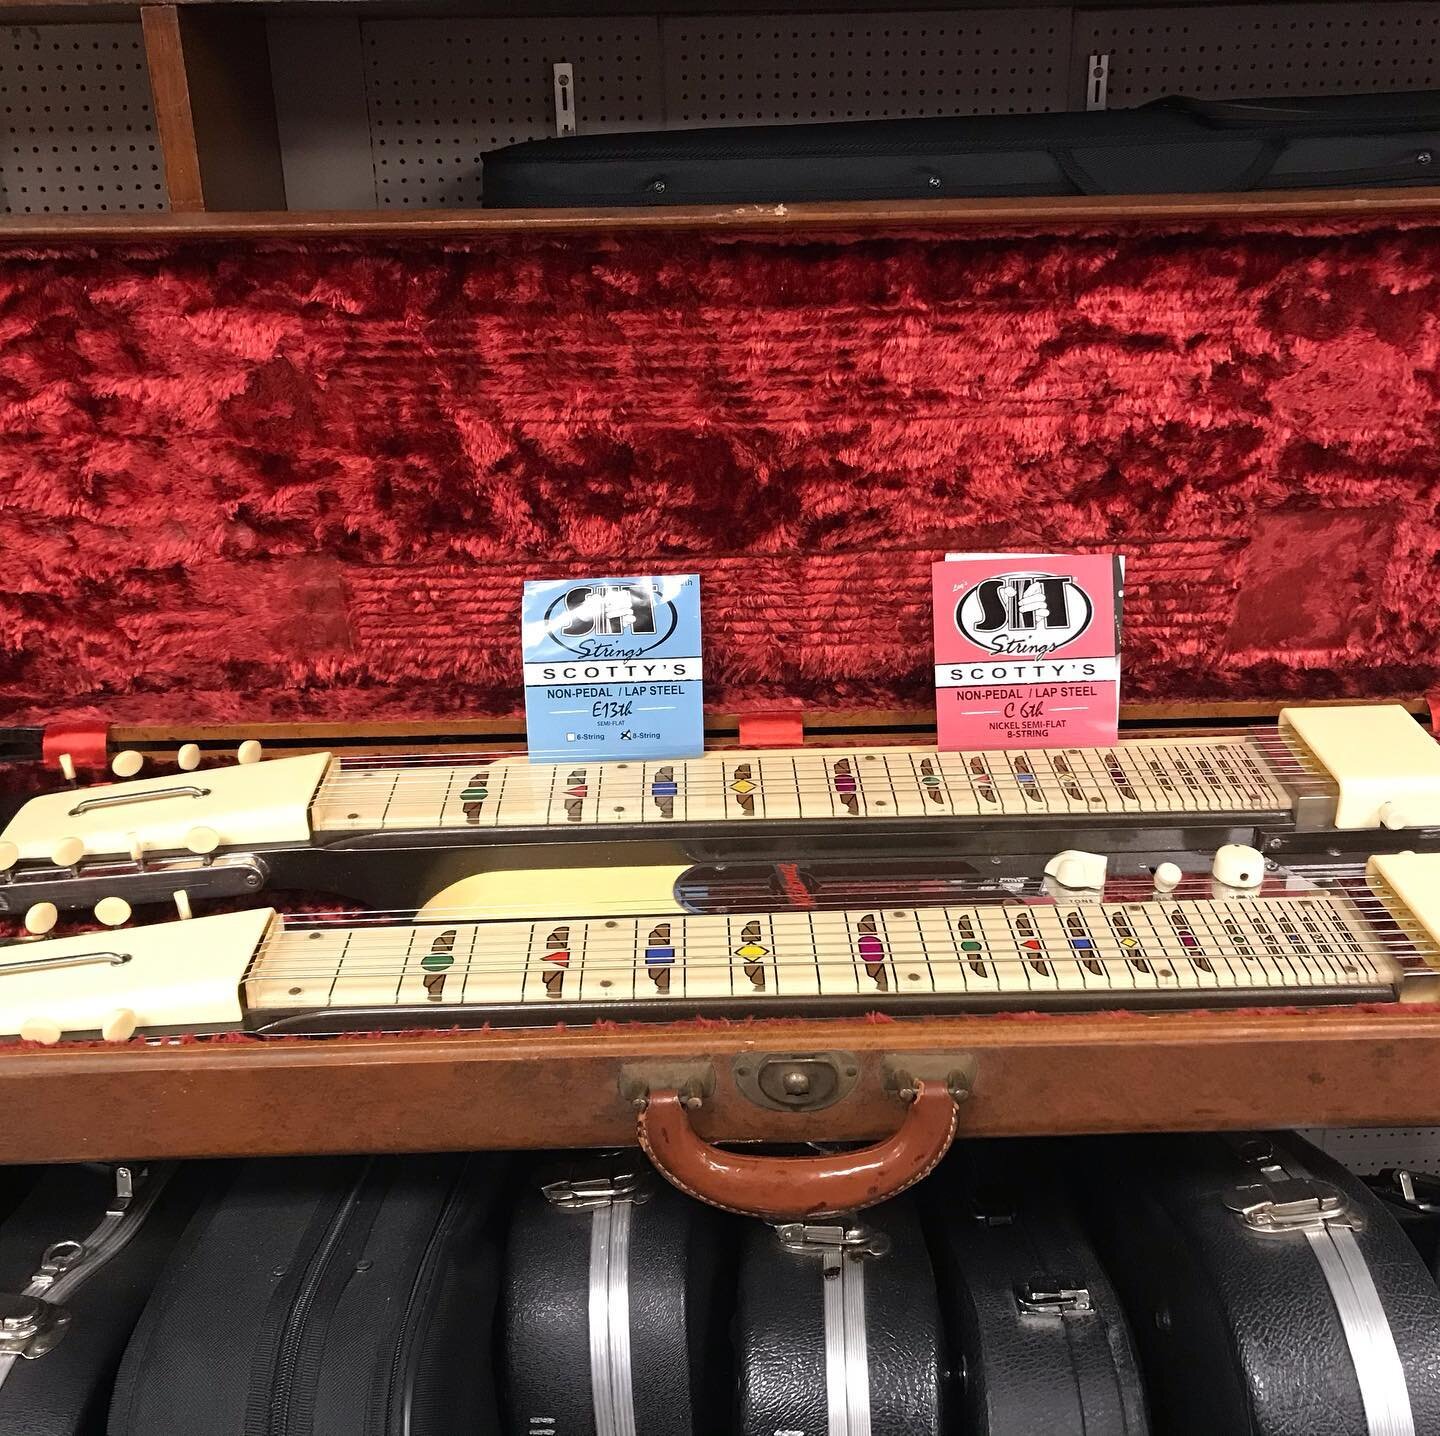 National Lap Steel for sale. Very good condition. $1595.